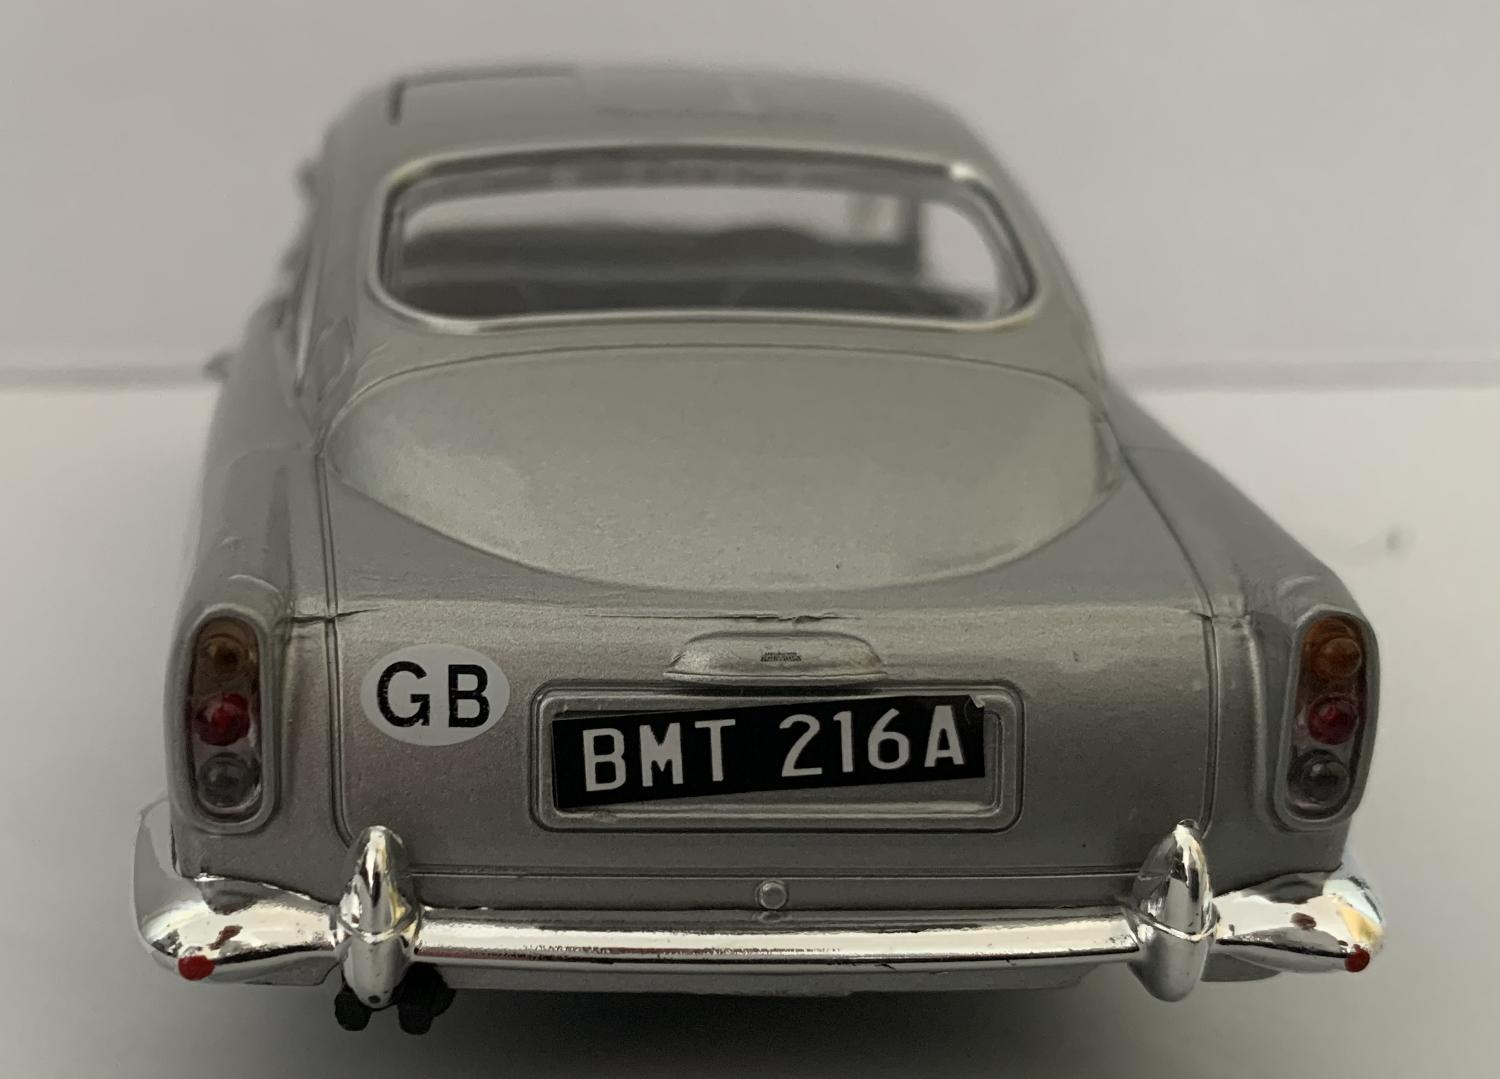 007’s Aston Martin DB5 in silver from Goldfinger 1:24 scale model from Motormax, James Bond 60 Years of Bond